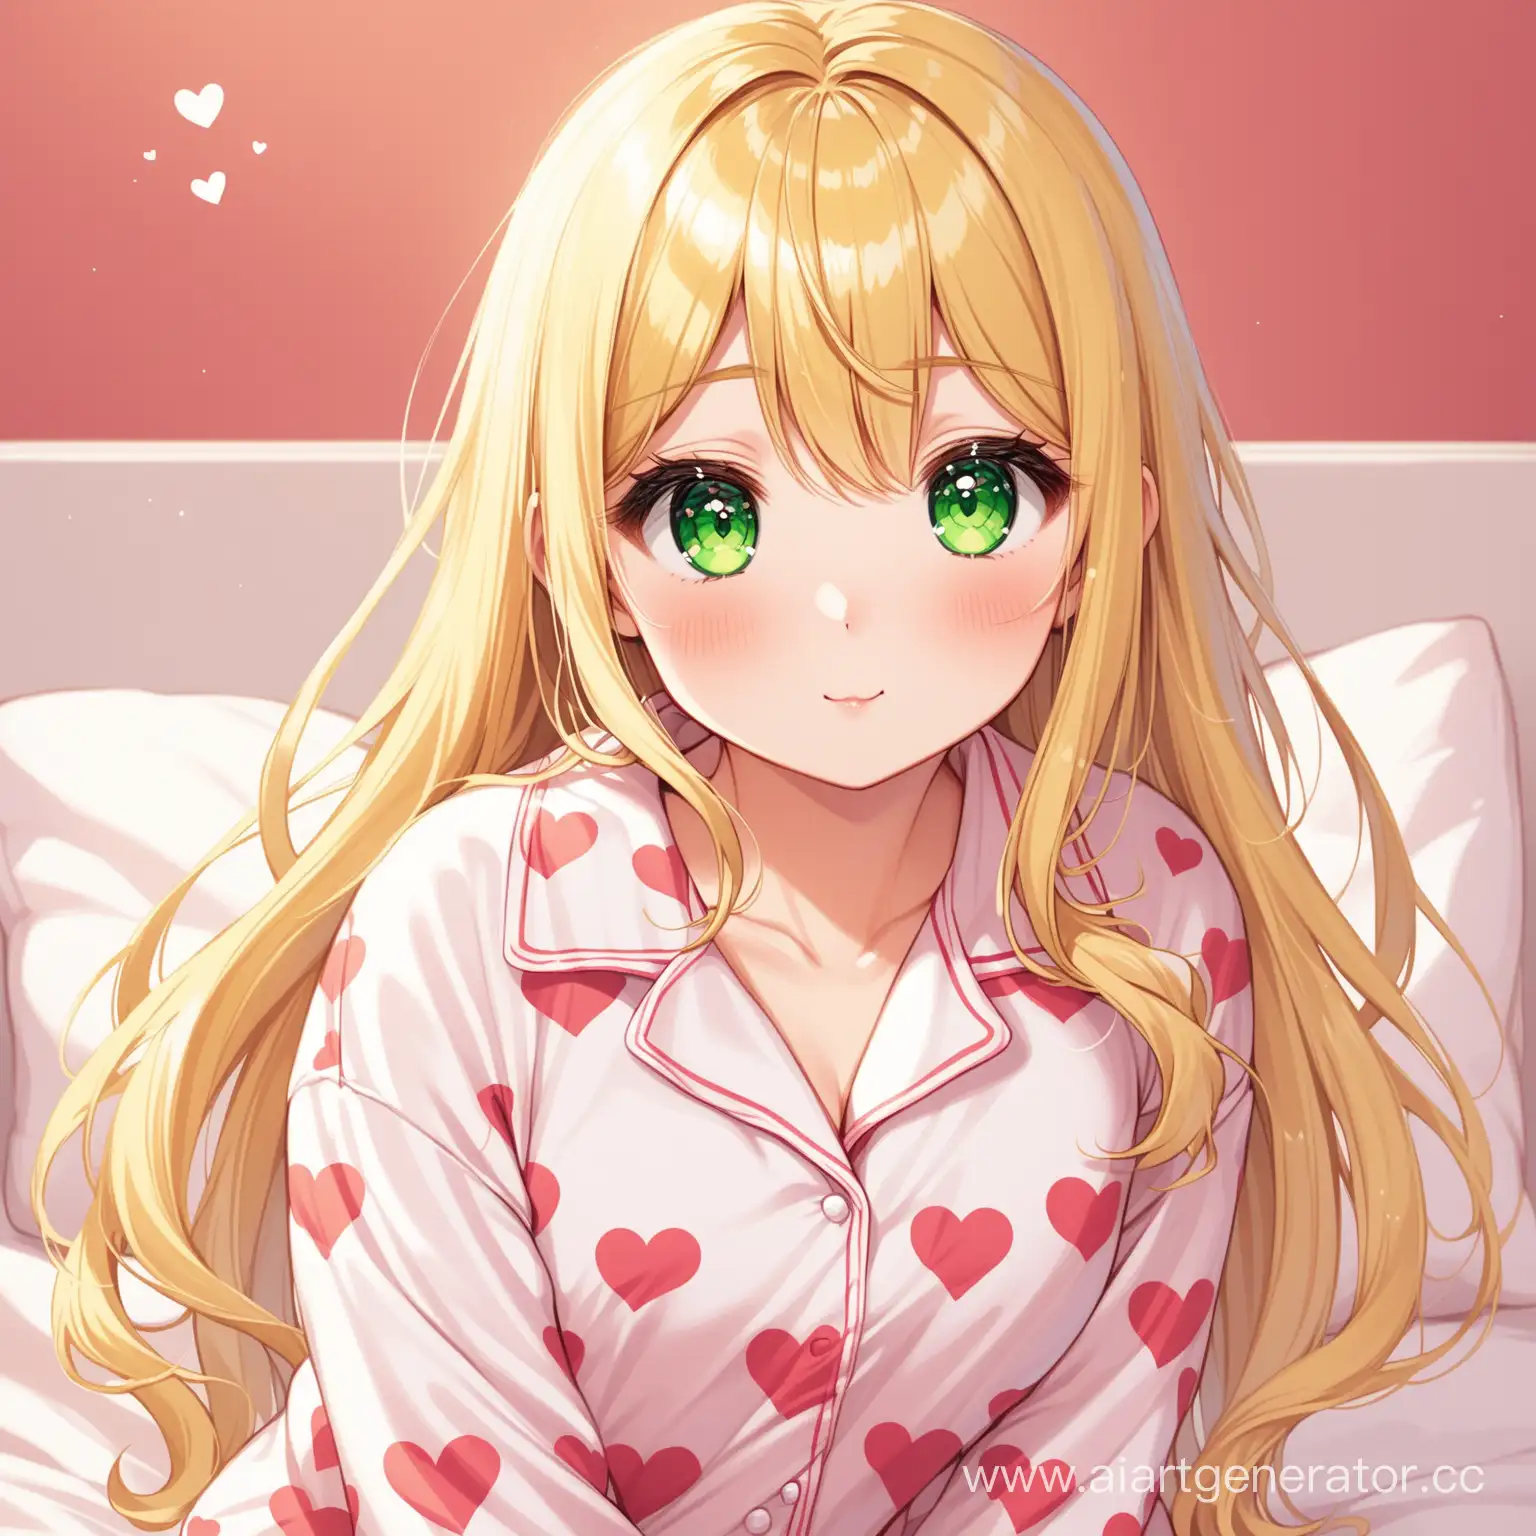 Adorable-Girl-with-Long-Blonde-Hair-in-Heart-Pattern-Pajamas